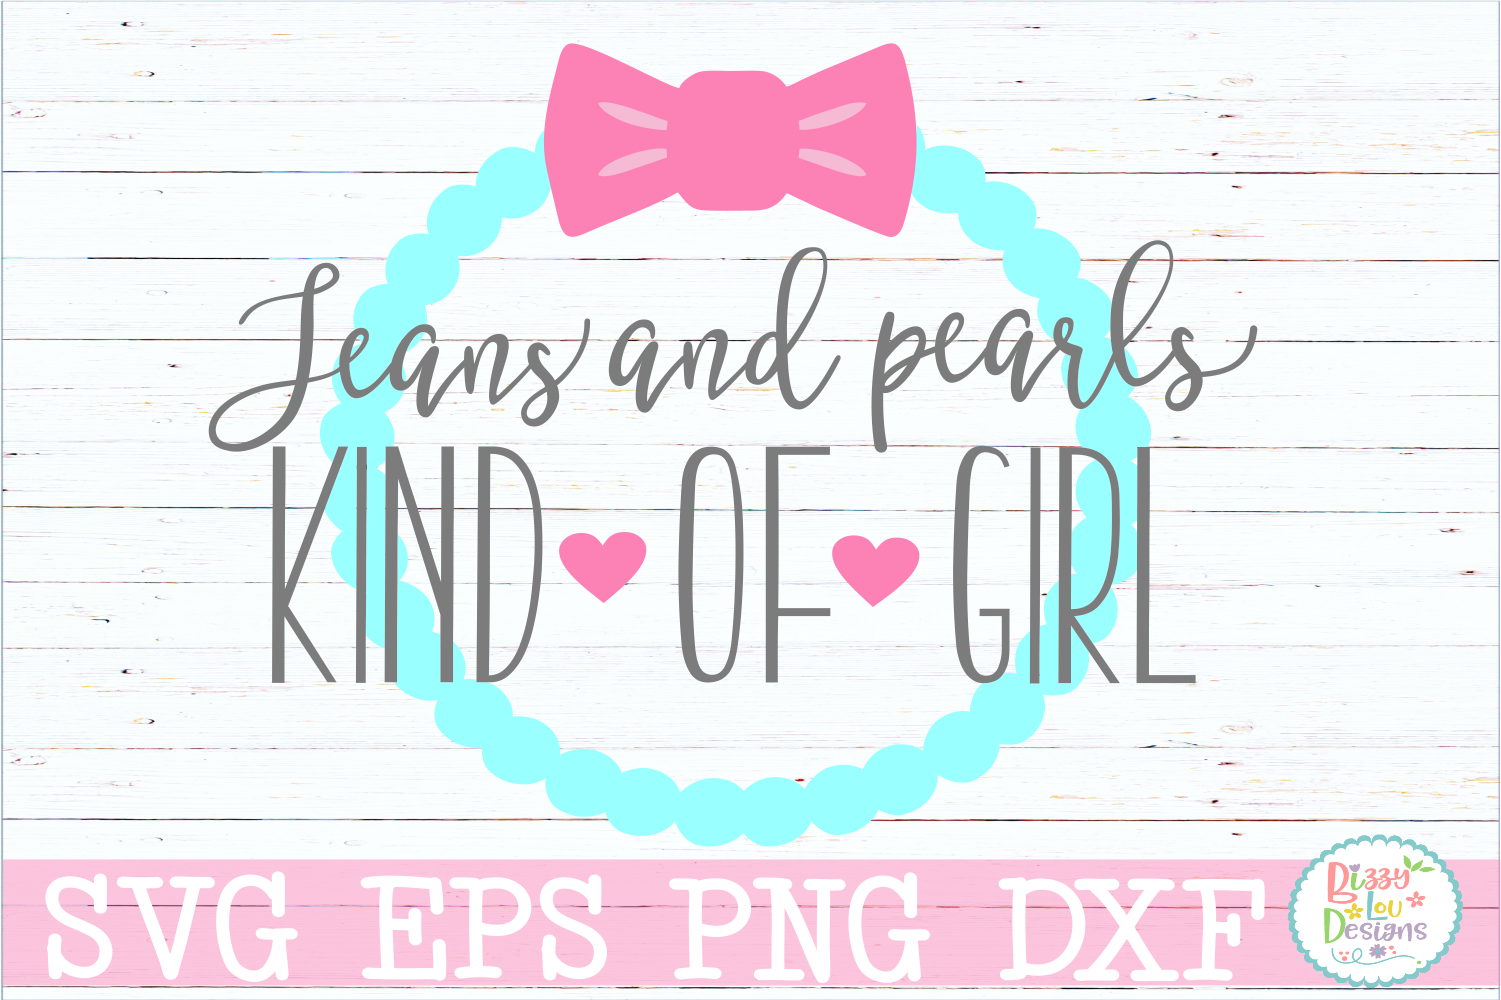 Download Jeans and Pearls Kind of Girl SVG DXF EPS PNG cutting file